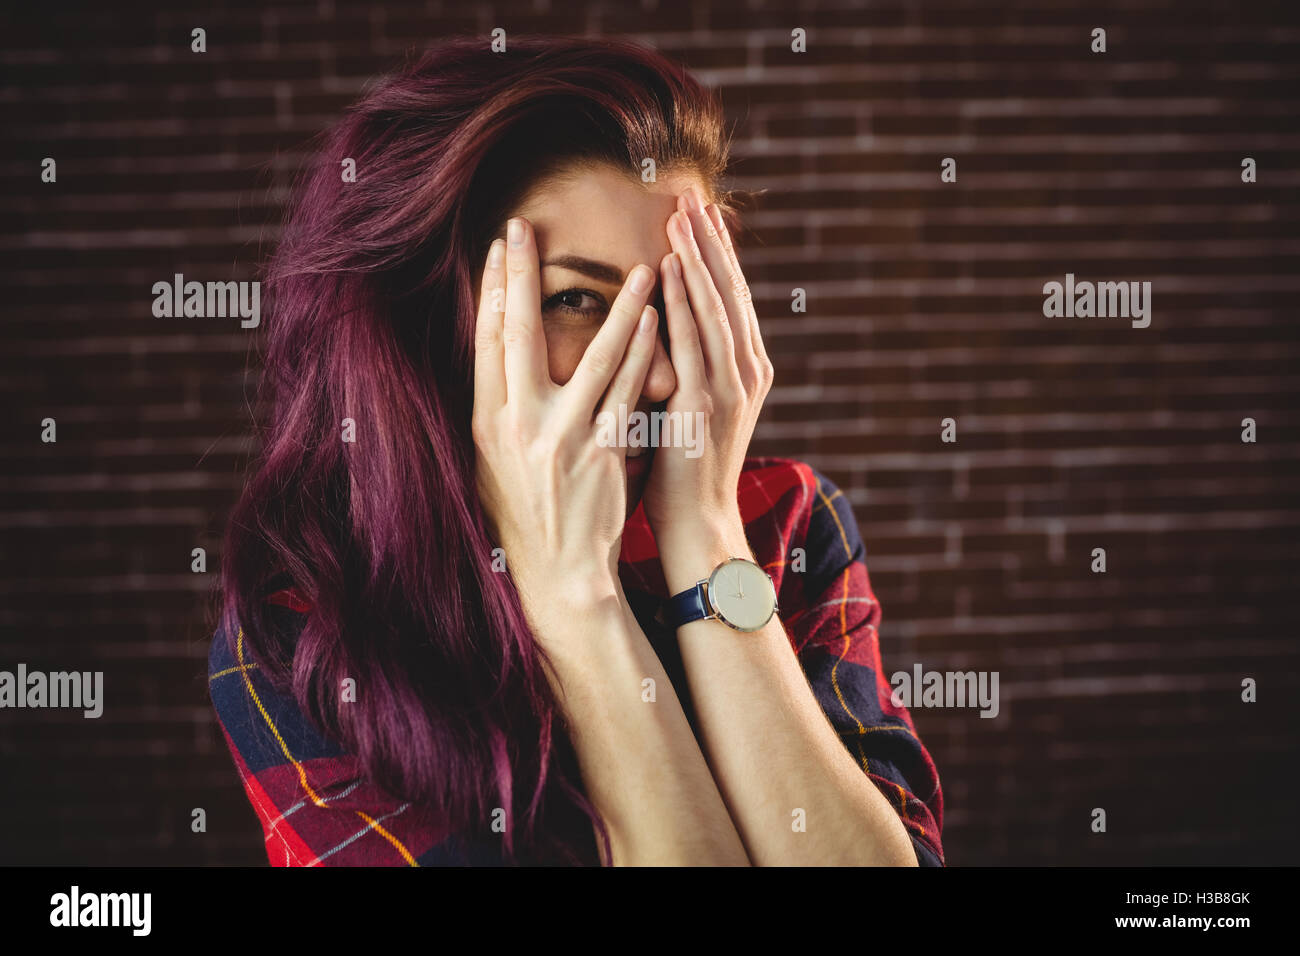 Young woman hiding face behind hands Stock Photo